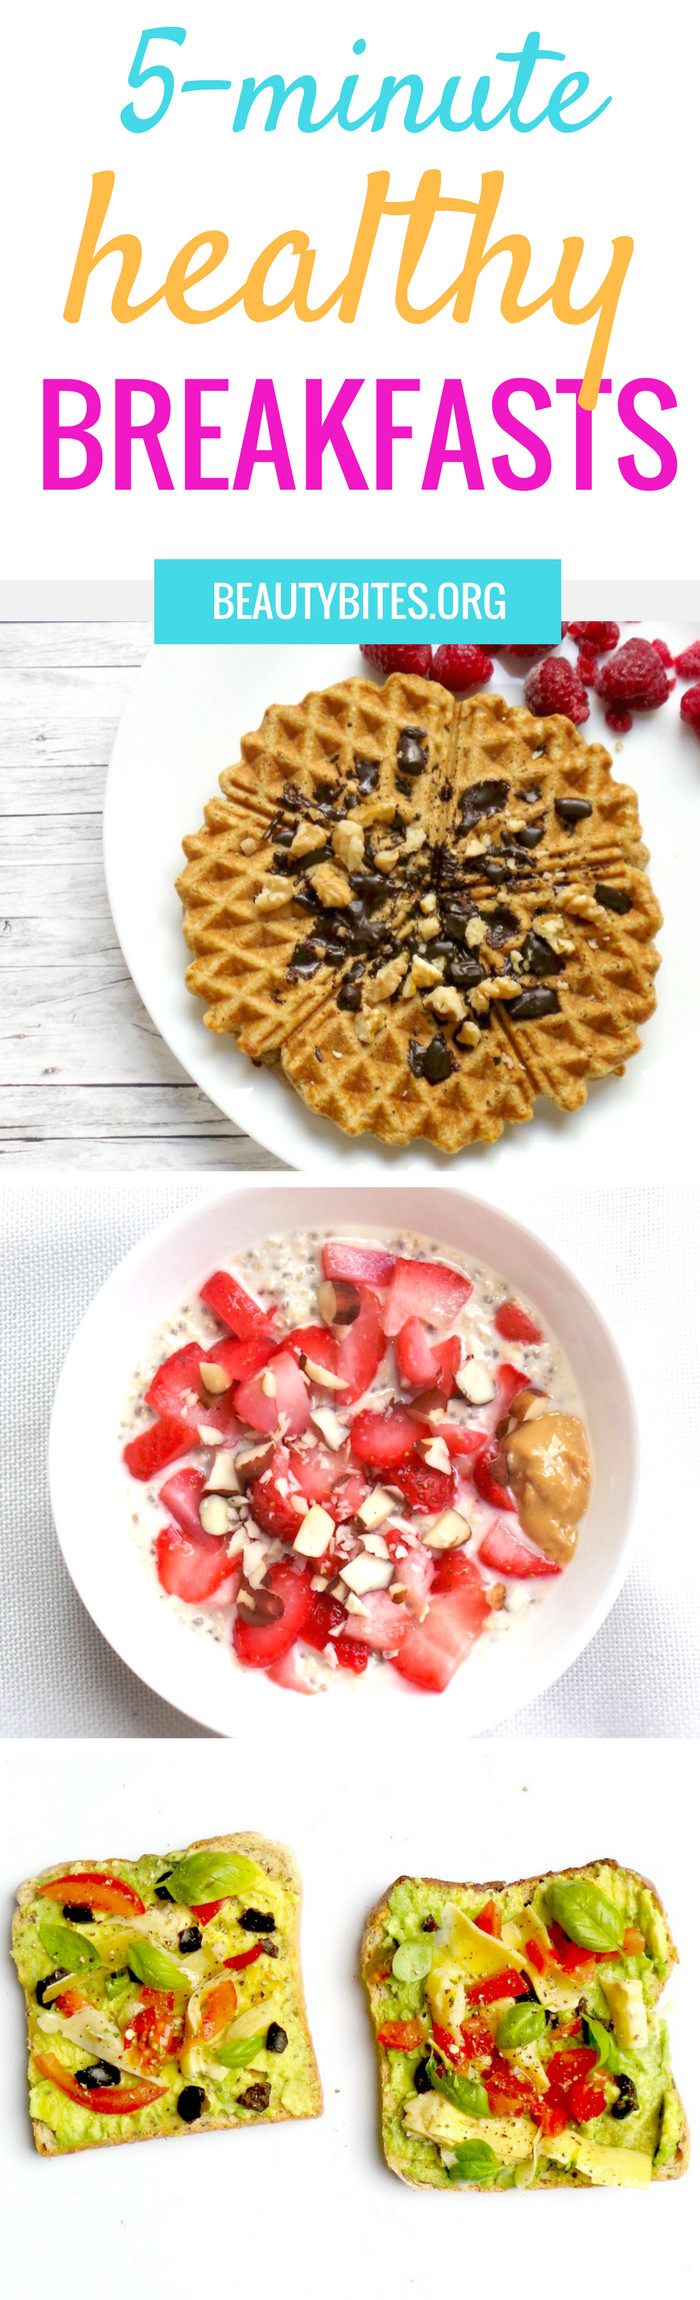 Healthy Breakfast That Keeps You Full
 Easy Healthy Breakfasts To Start Your Day Right & Keep You